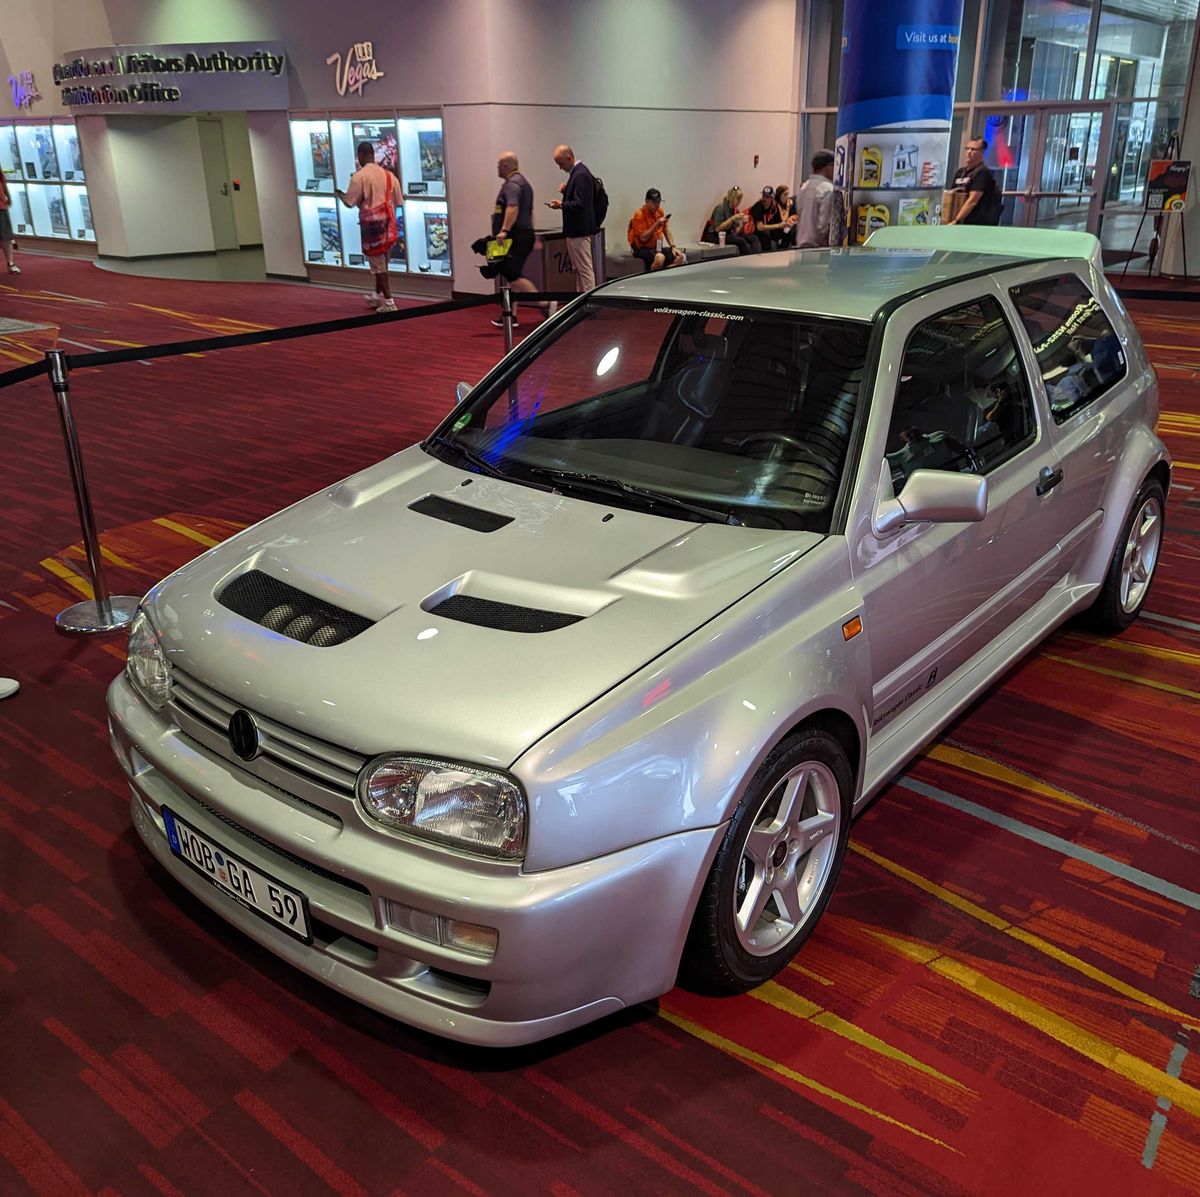 VW Brought This Obscure Golf Rally Prototype to SEMA, and It's Awesome